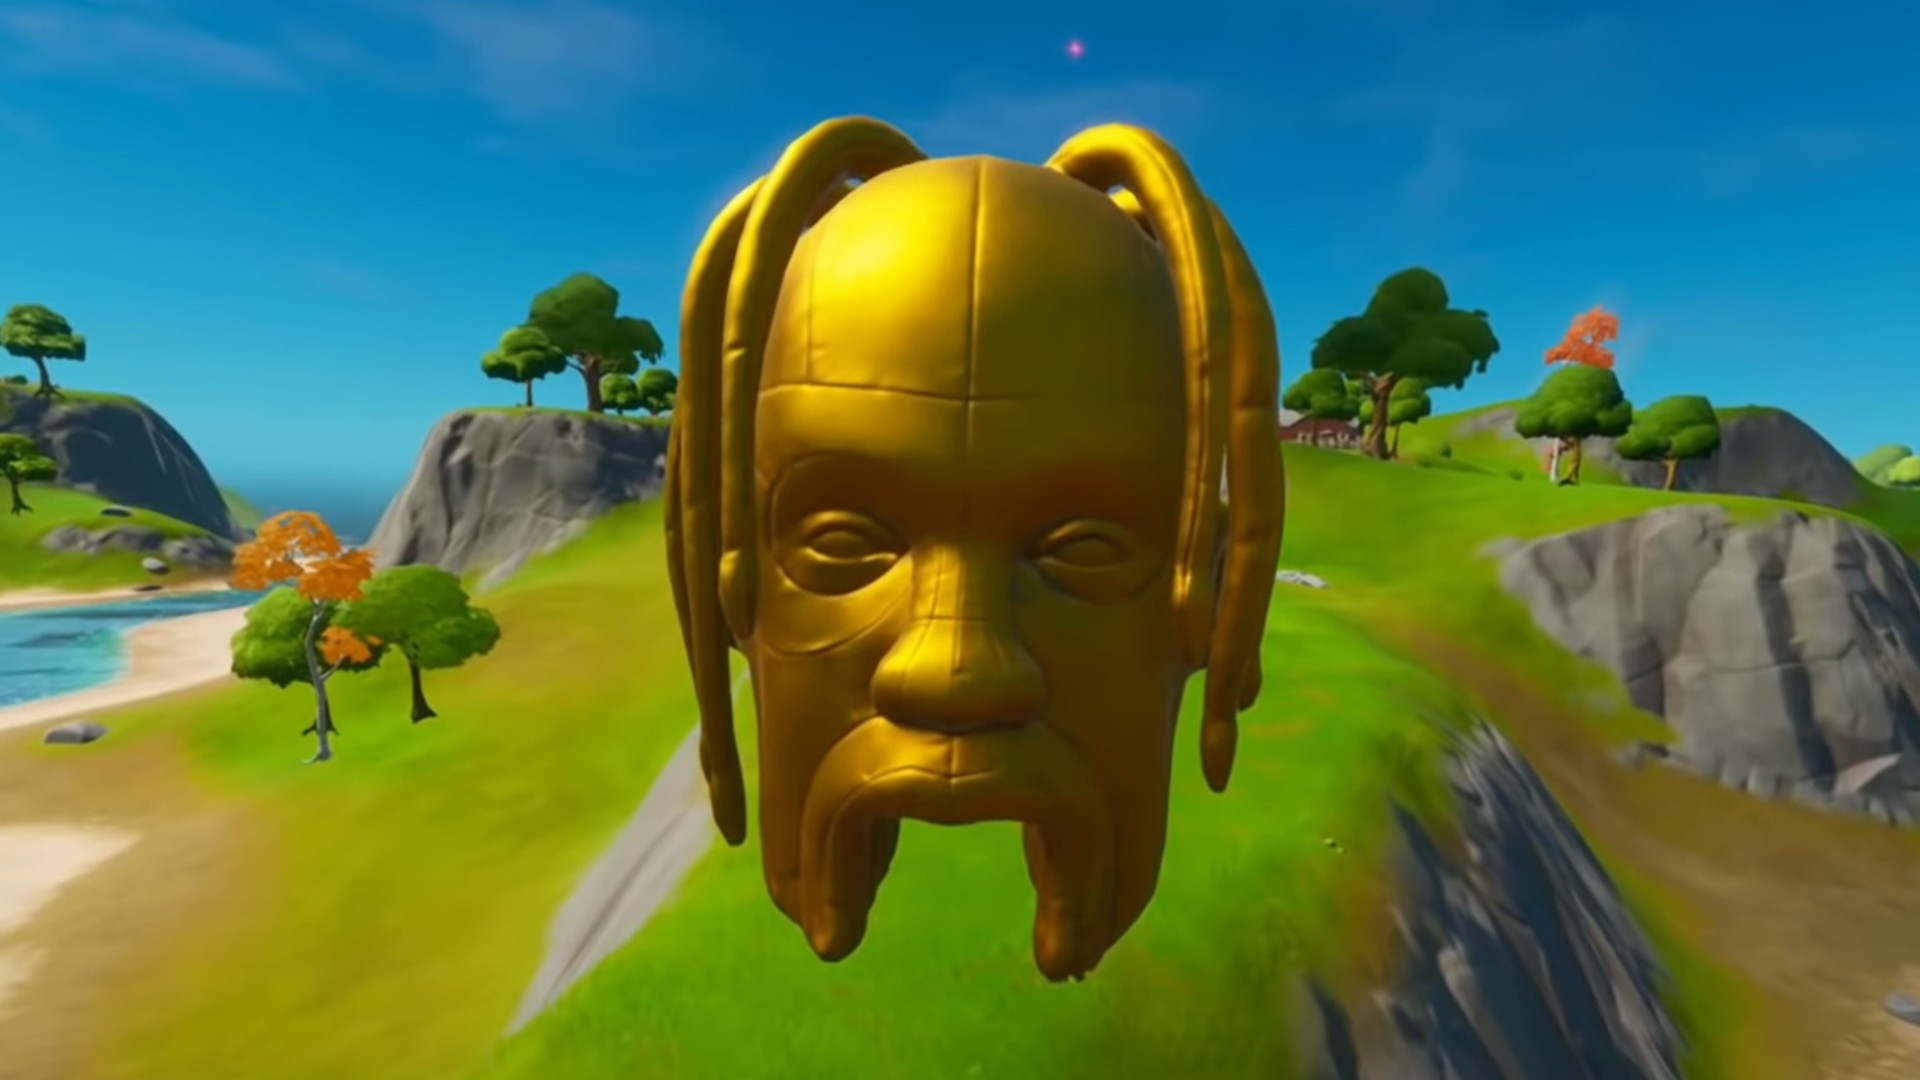 Where to bounce off different giant Astro heads in Fortnite